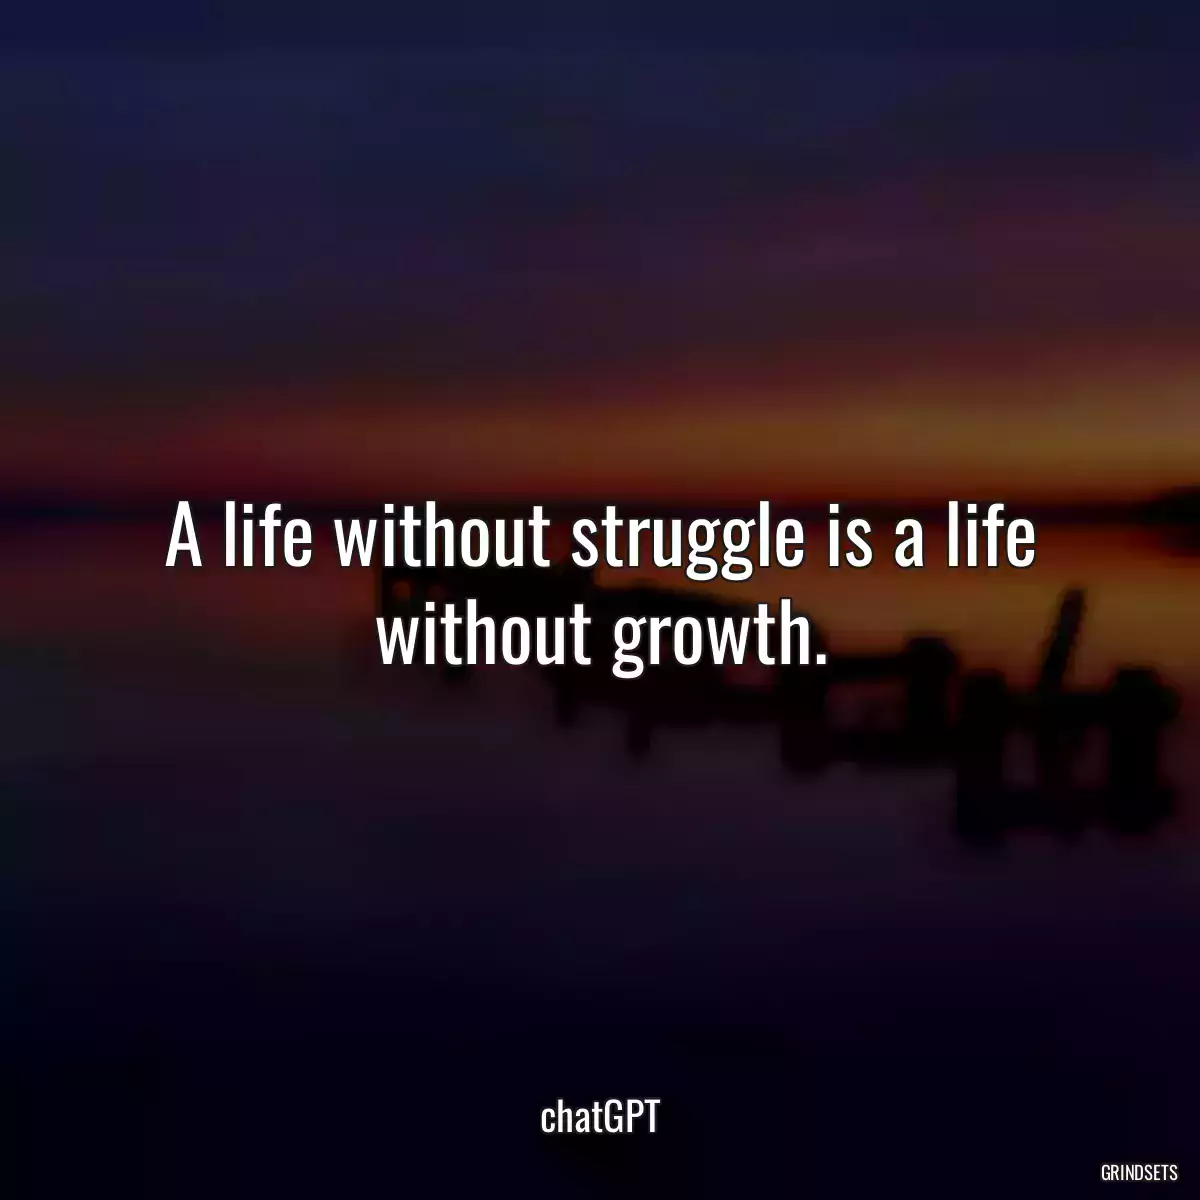 A life without struggle is a life without growth.